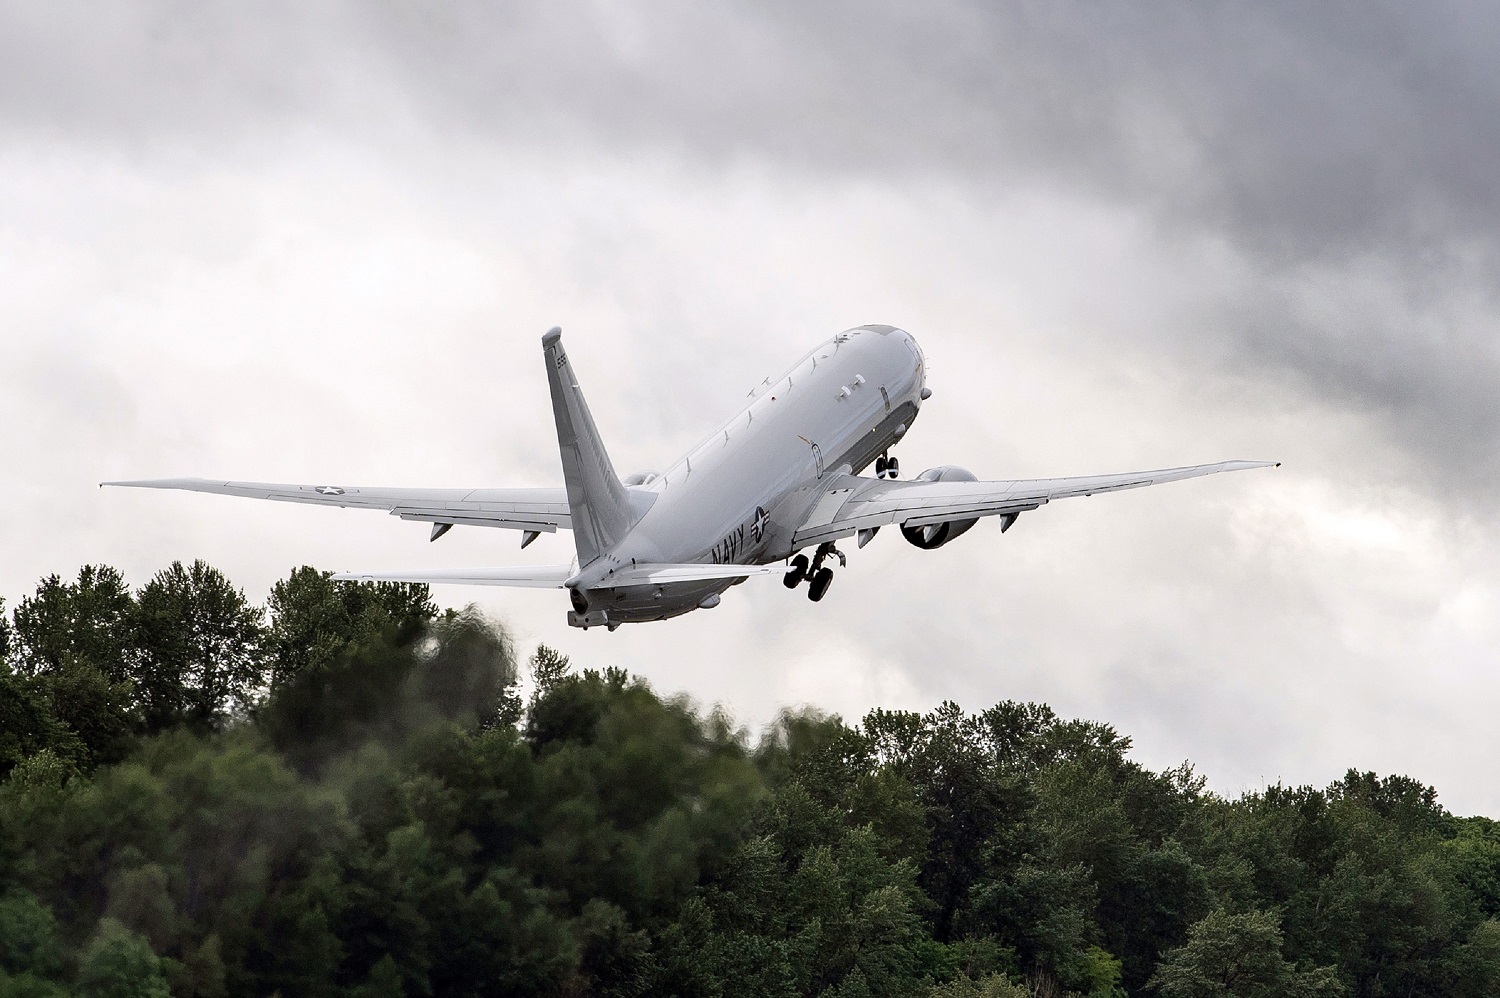 Boeing Delivers 100th P-8A Poseidon Built for the U.S. Navy